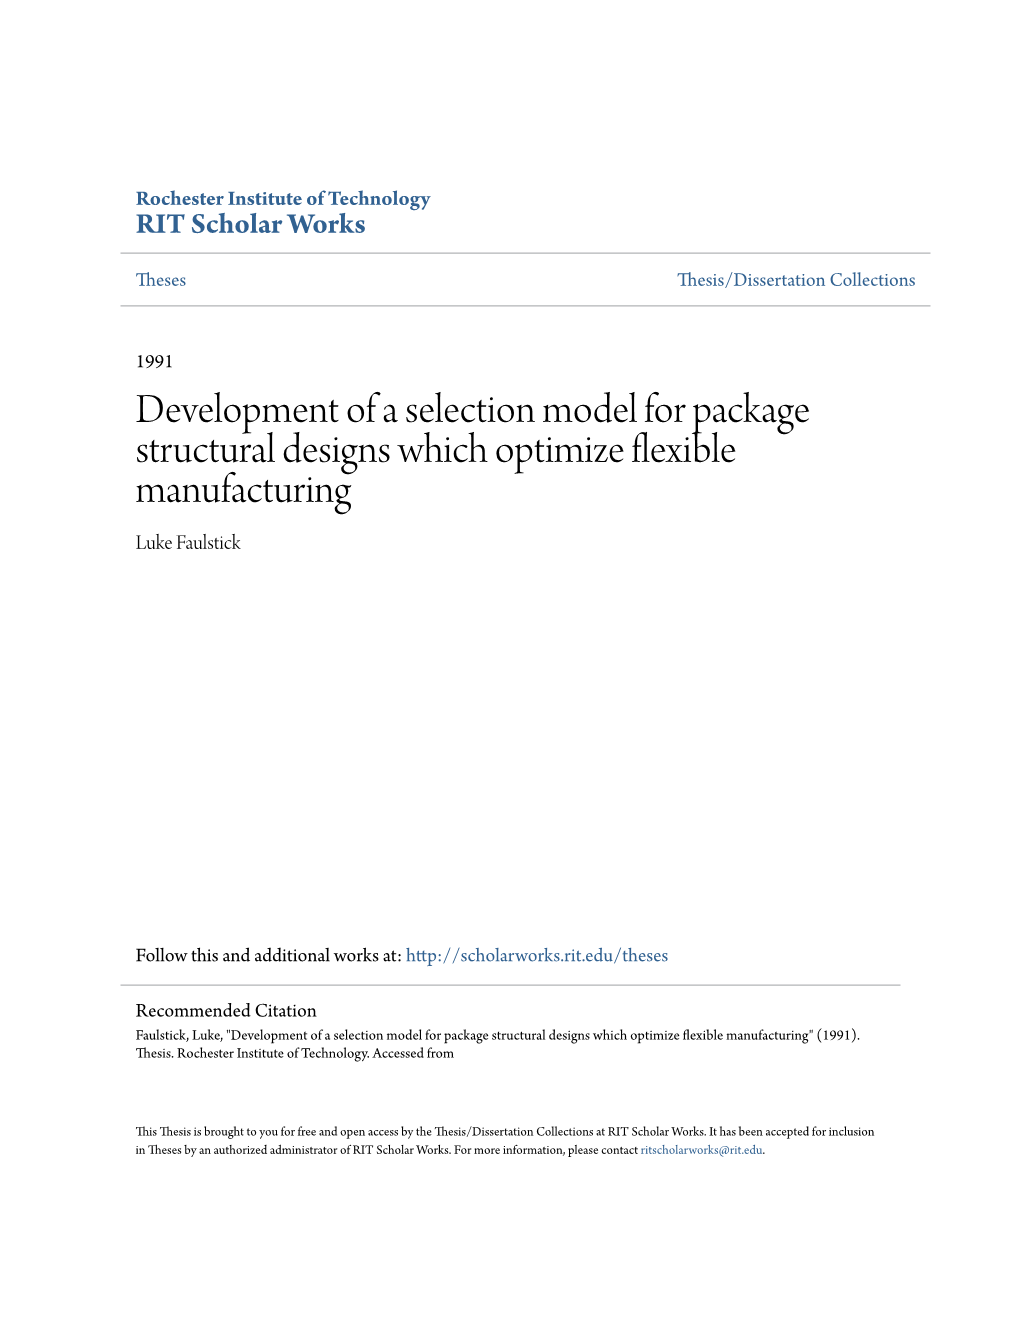 Development of a Selection Model for Package Structural Designs Which Optimize Flexible Manufacturing Luke Faulstick